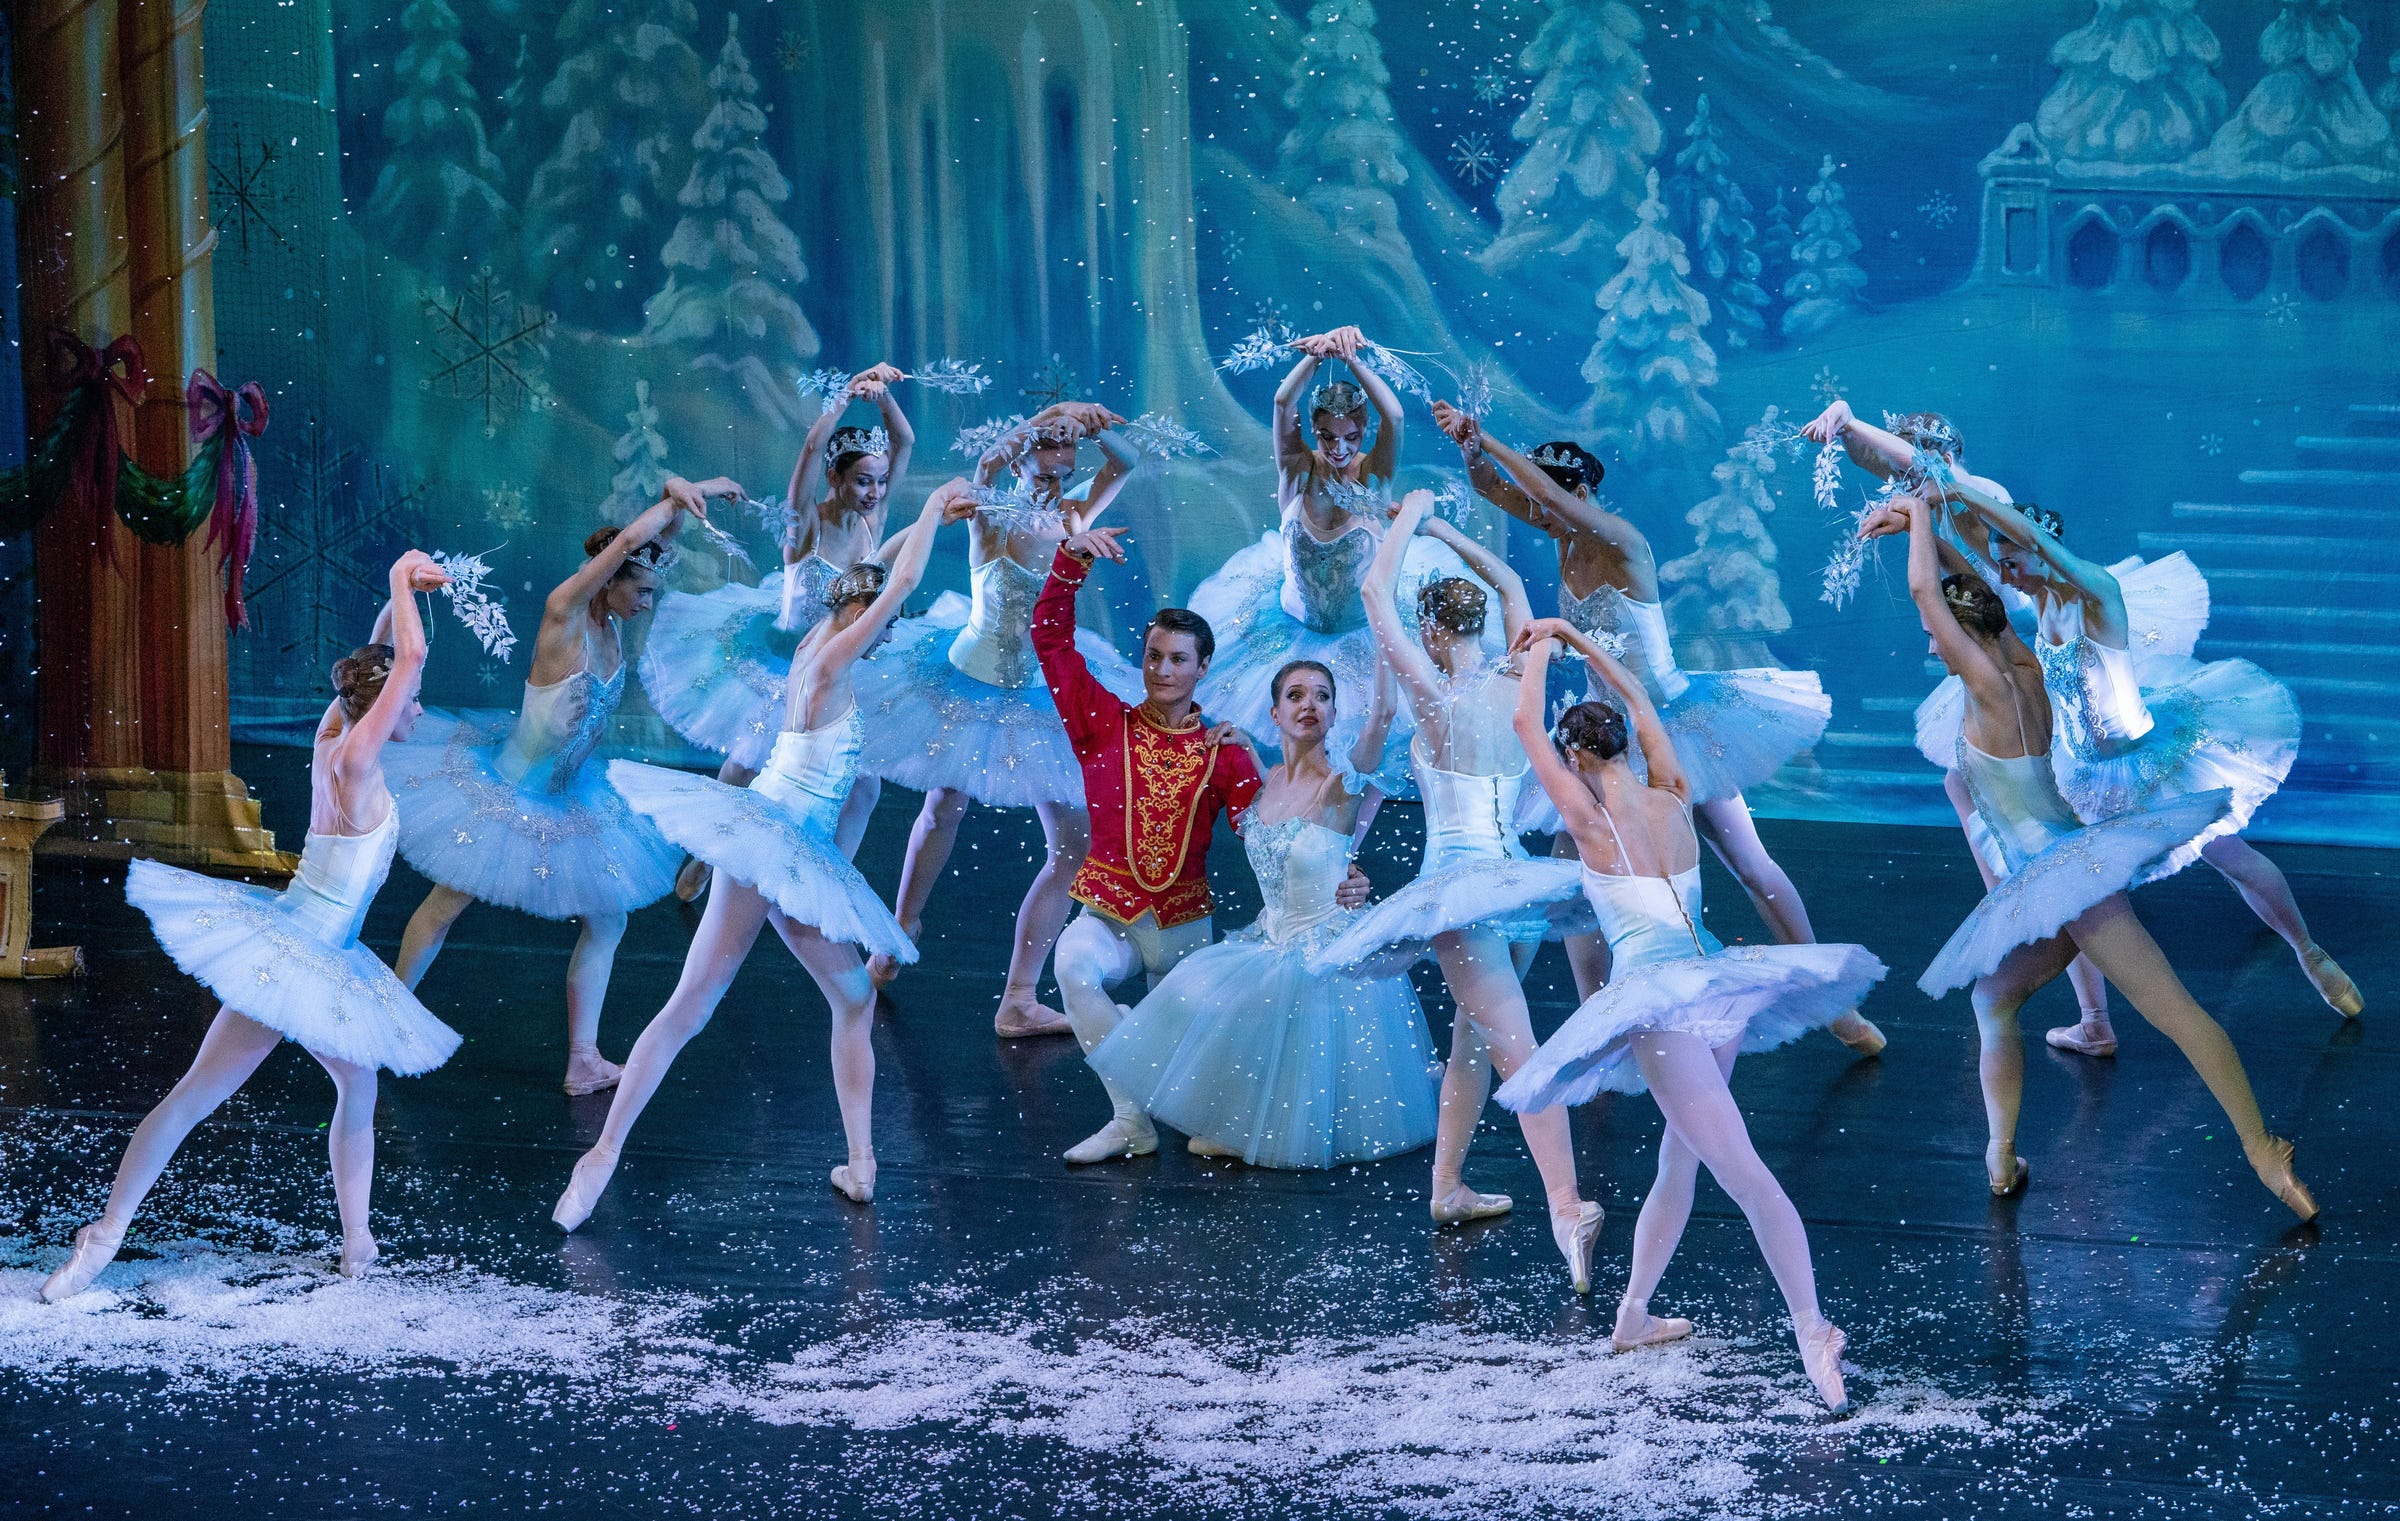 The Moscow Ballet's "Great Russian Nutcracker" features 36 dancers and 200 lush costumes.